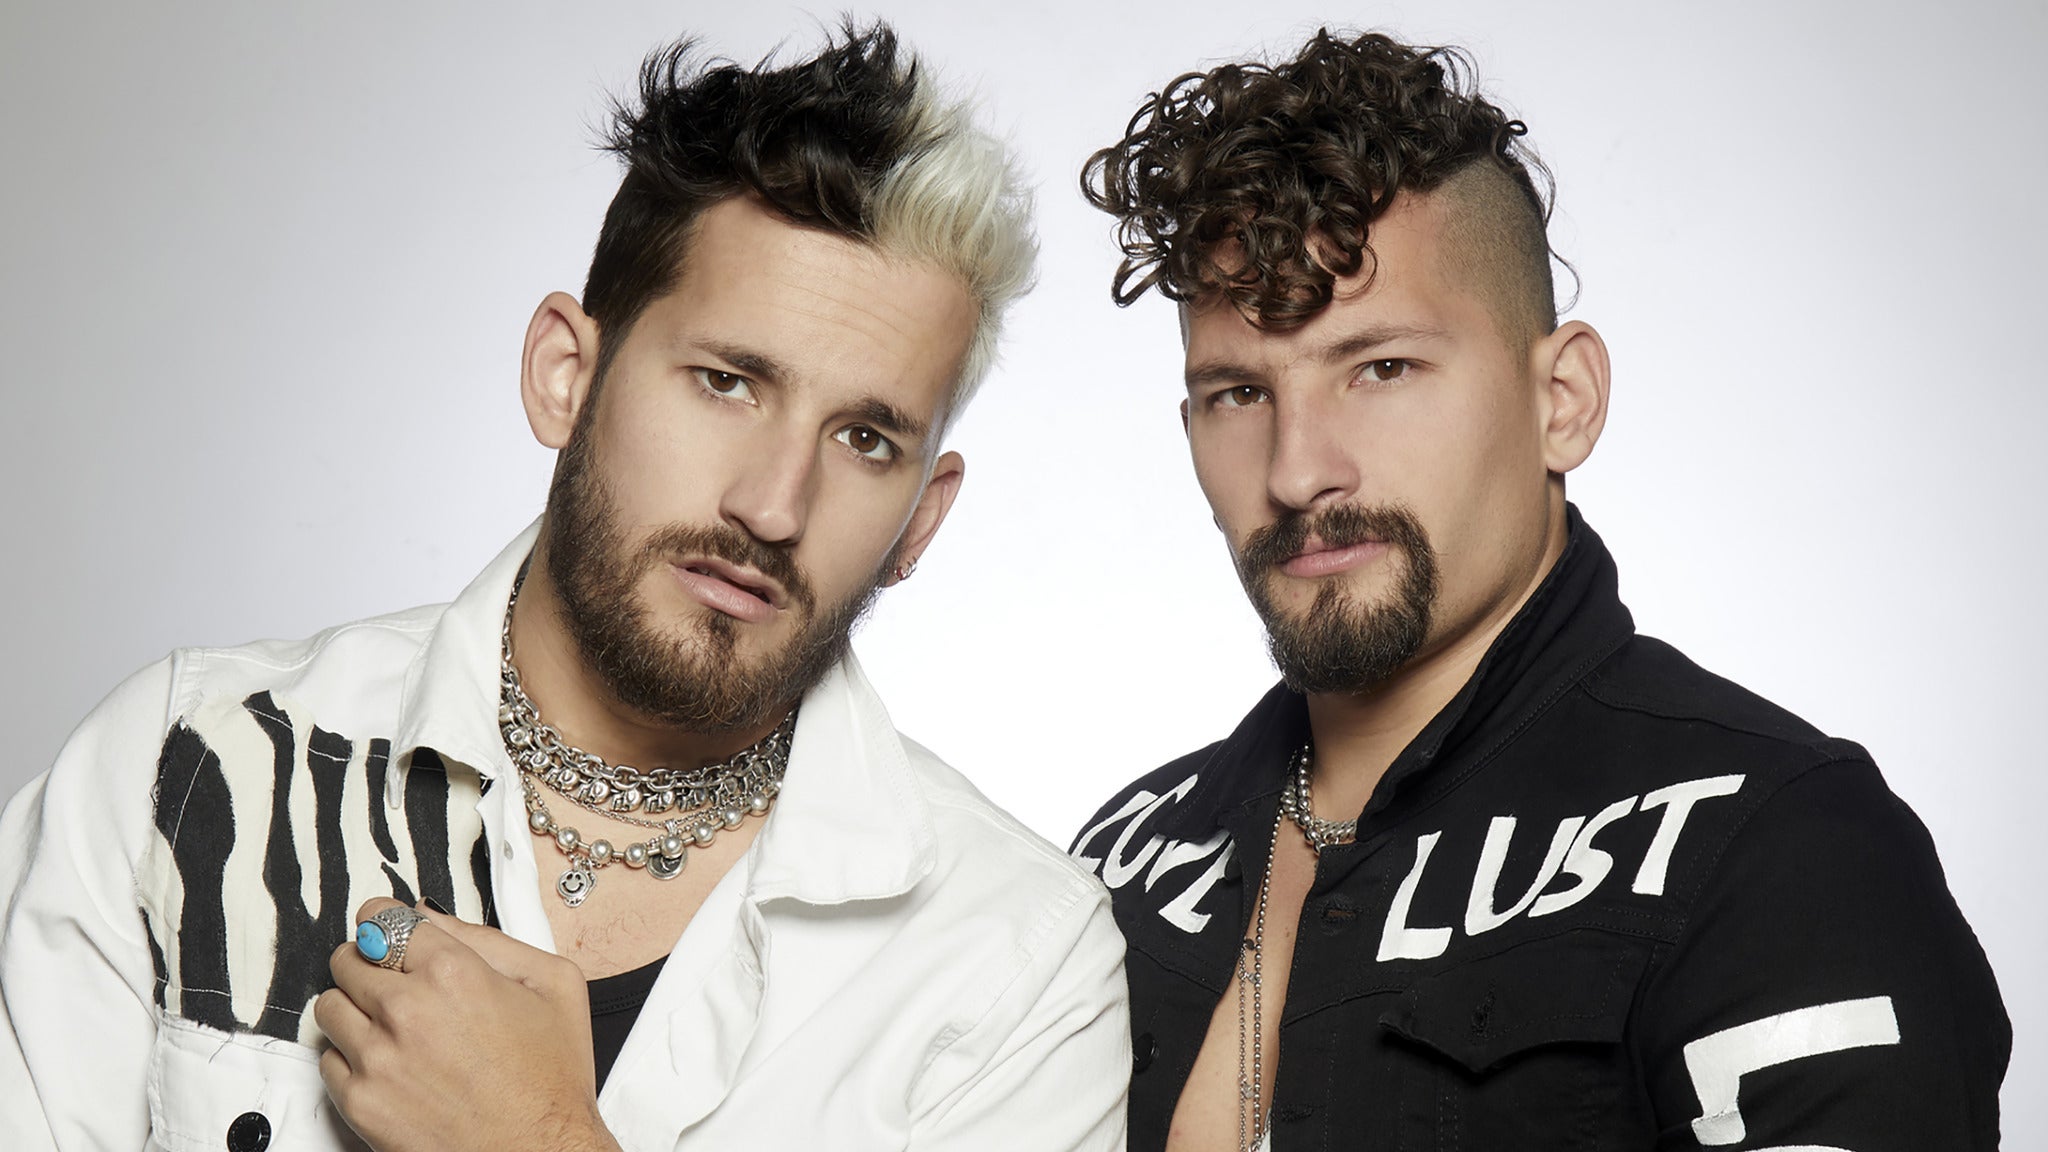 Mau y Ricky + Piso 21- Panas & Parceros in Hollywood promo photo for Artist presale offer code